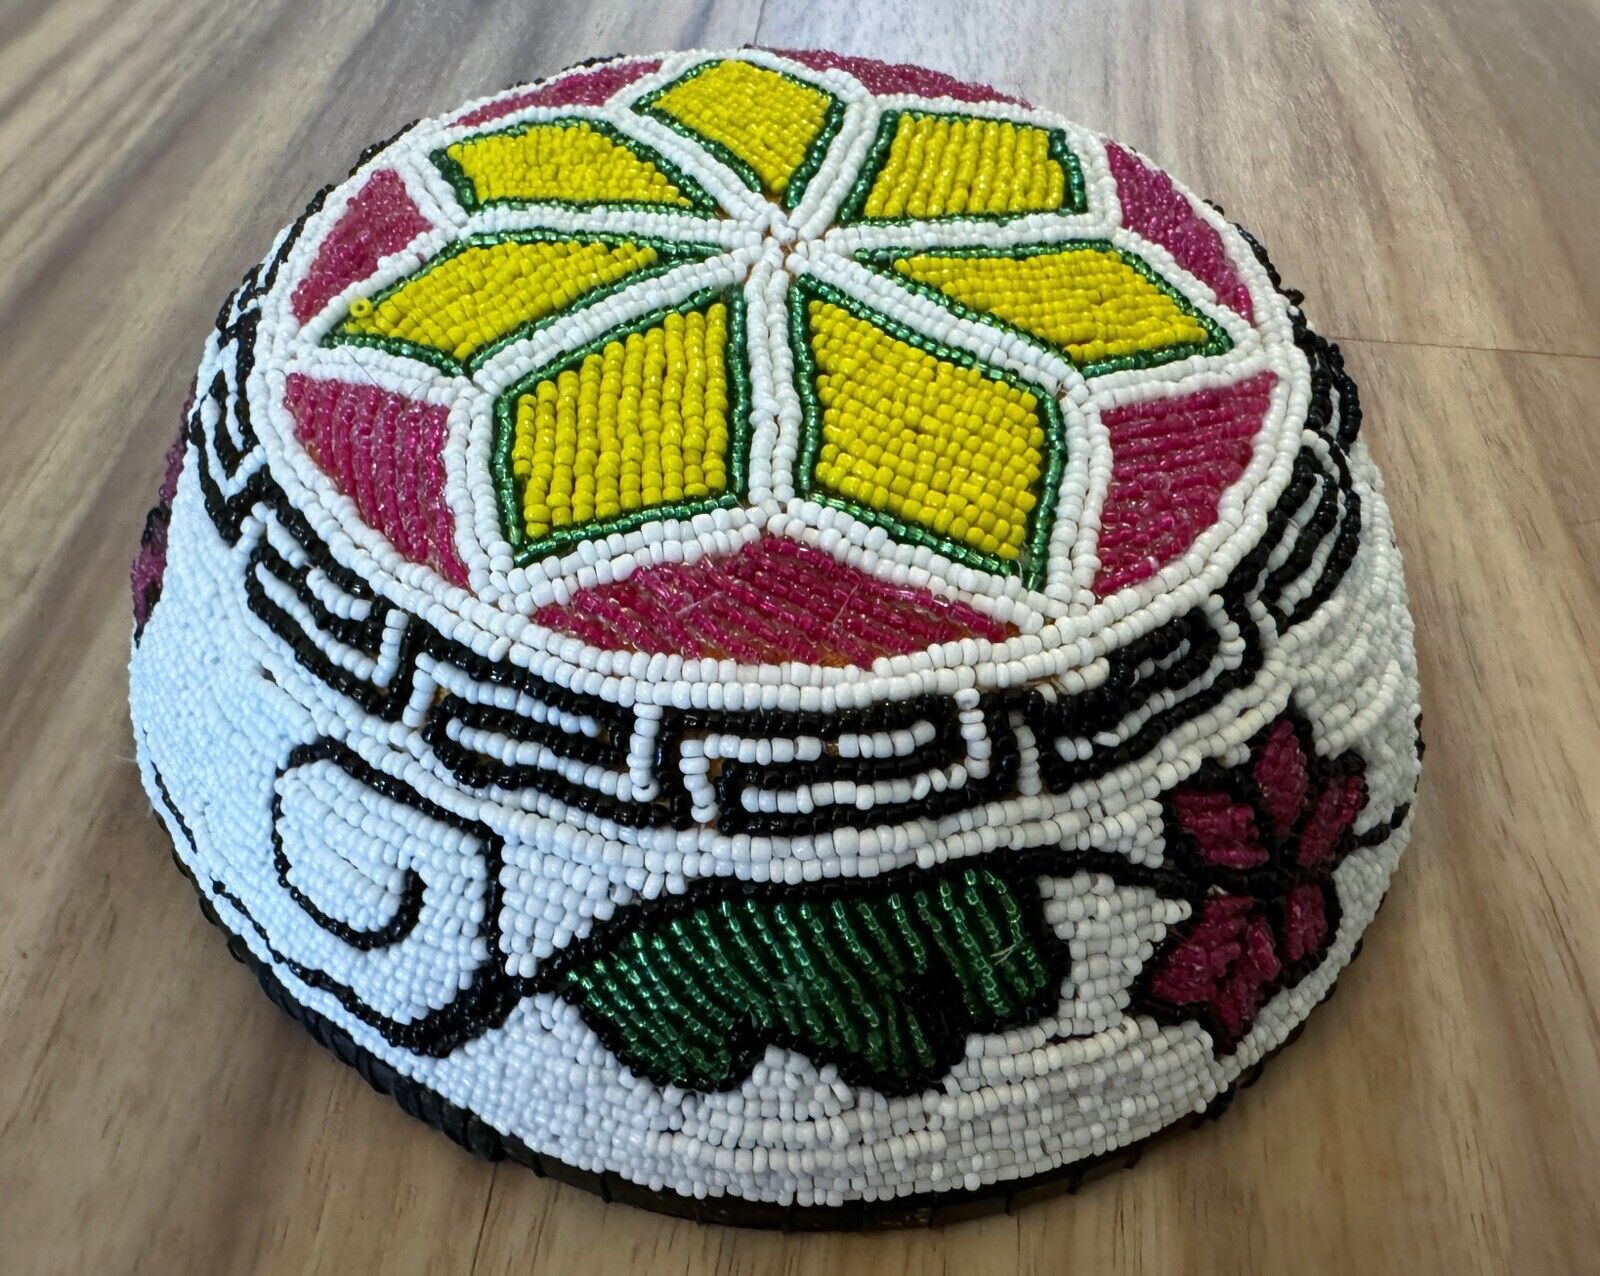 Vintage Beaded Bowl Huichol Art Floral 8” by 3”